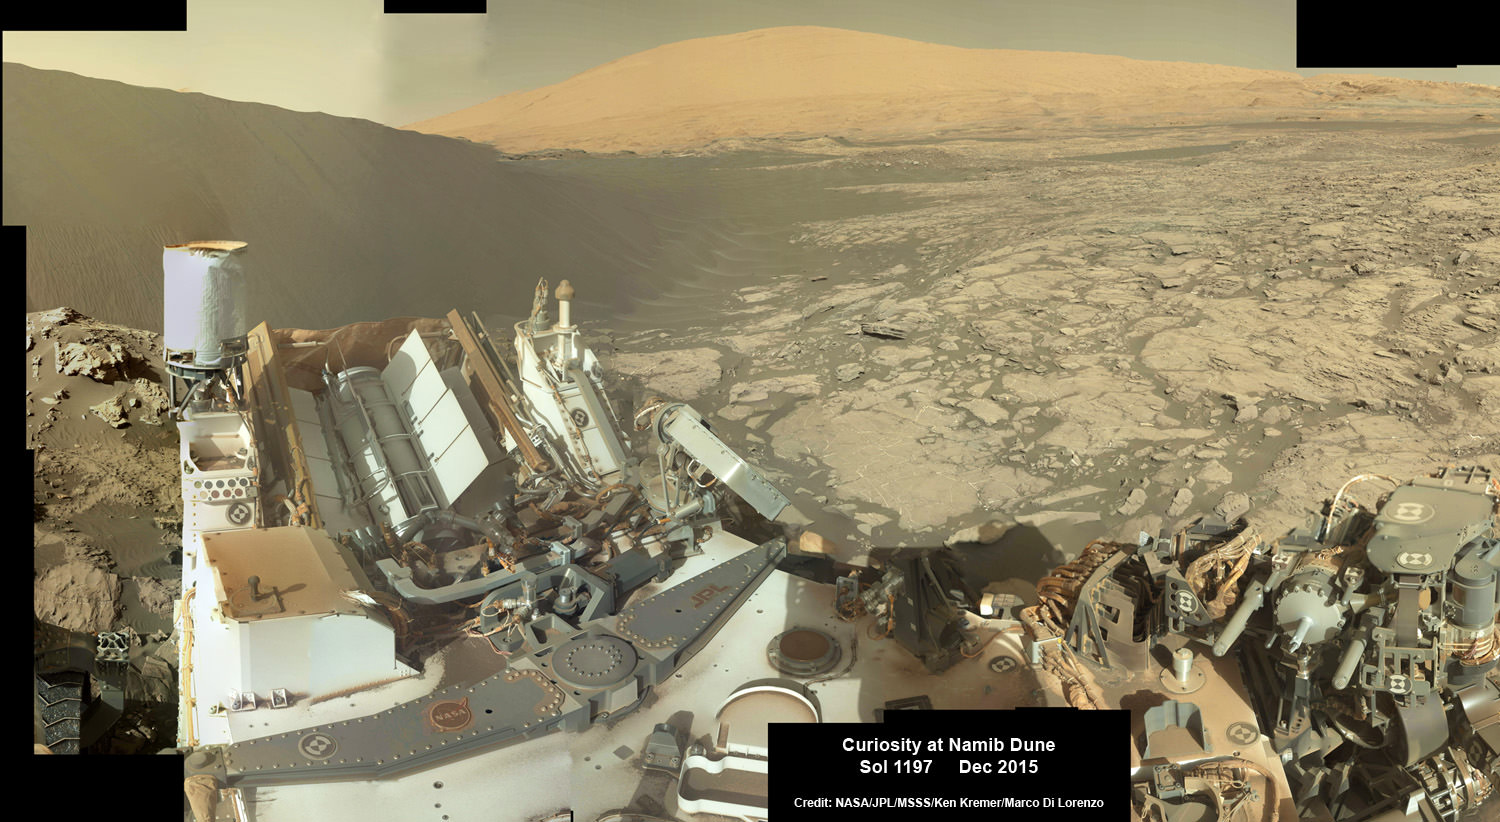 Curiosity explores Red Planet paradise at Namib Dune during Christmas 2015 - backdropped by Mount Sharp.  Curiosity took first ever self-portrait with Mastcam color camera after arriving at the lee face of Namib Dune.  This photo mosaic shows a portion of the full self portrait and is stitched from Mastcam color camera raw images taken on Sol 1197, Dec. 19, 2015.  Credit: NASA/JPL/MSSS/Ken Kremer/kenkremer.com/Marco Di Lorenzo